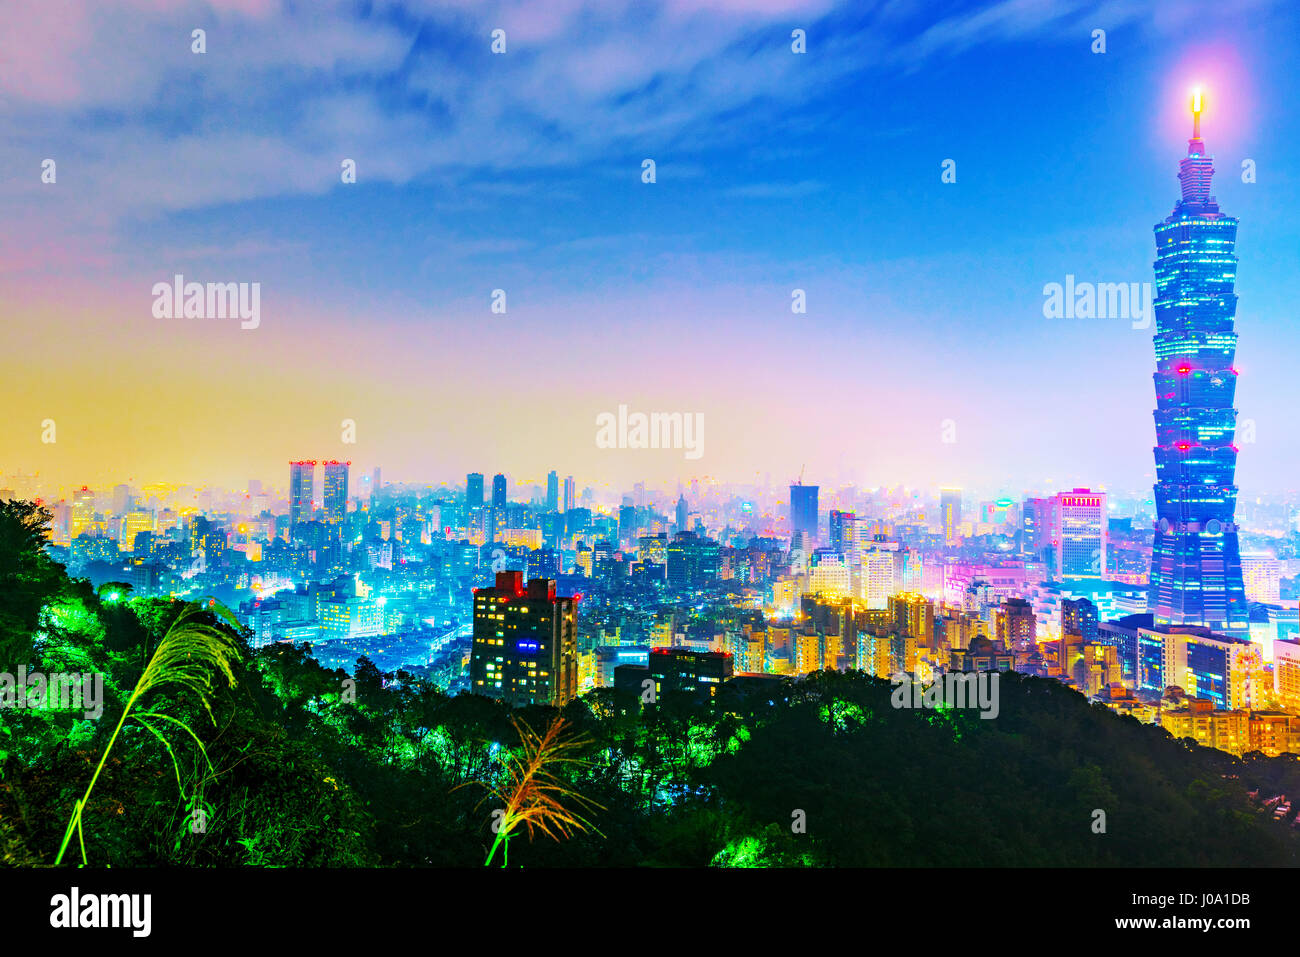 TAIPEI, TAIWAN - MARCH 20: This is a view of the Taipei 101 building and Xinyi financial district taken from Elephant mountain at night on March 20, 2 Stock Photo